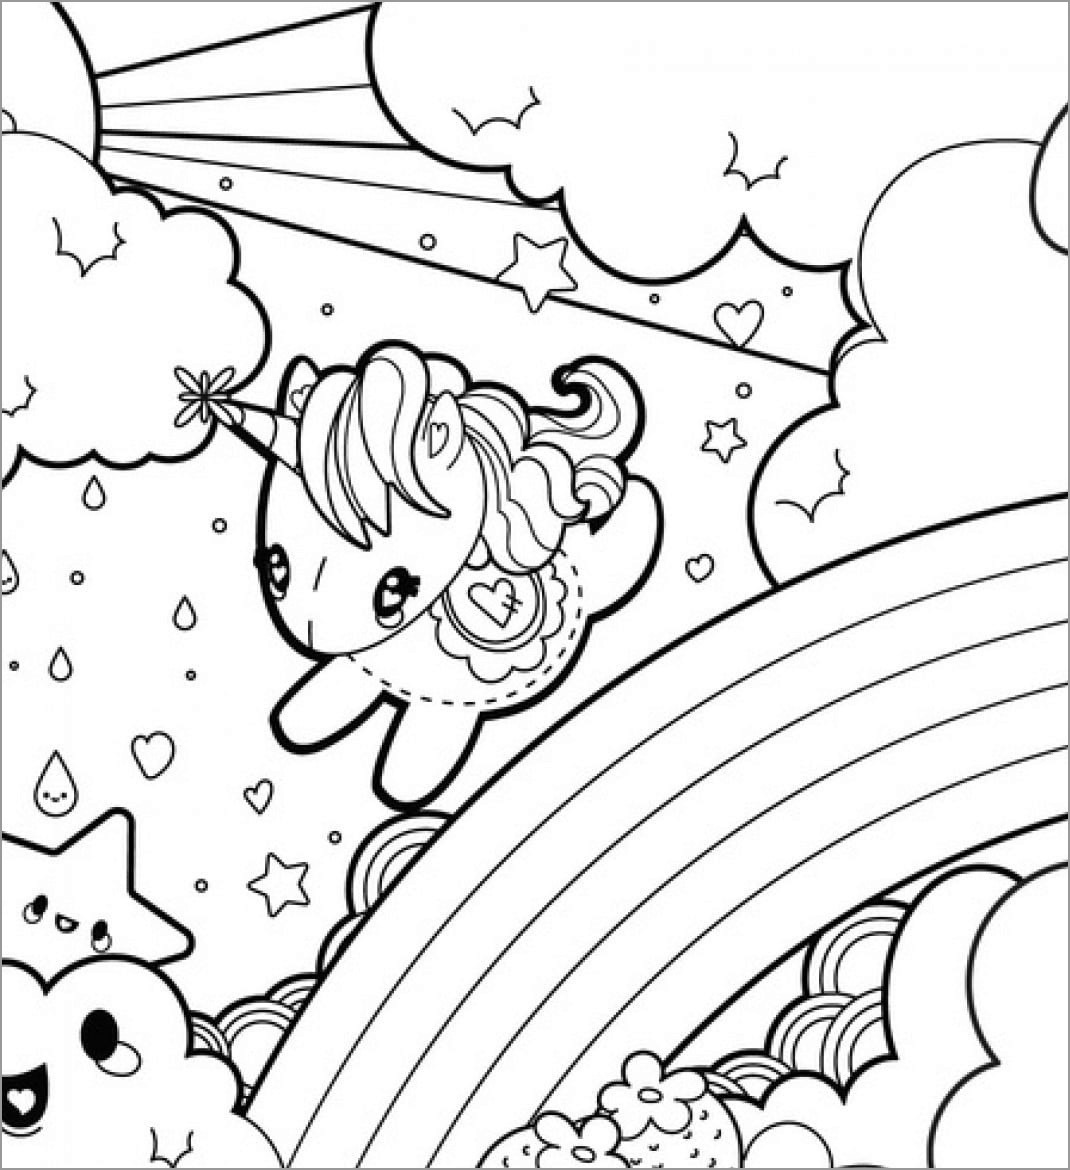 Unicorn Coloring Page to Print   ColoringBay